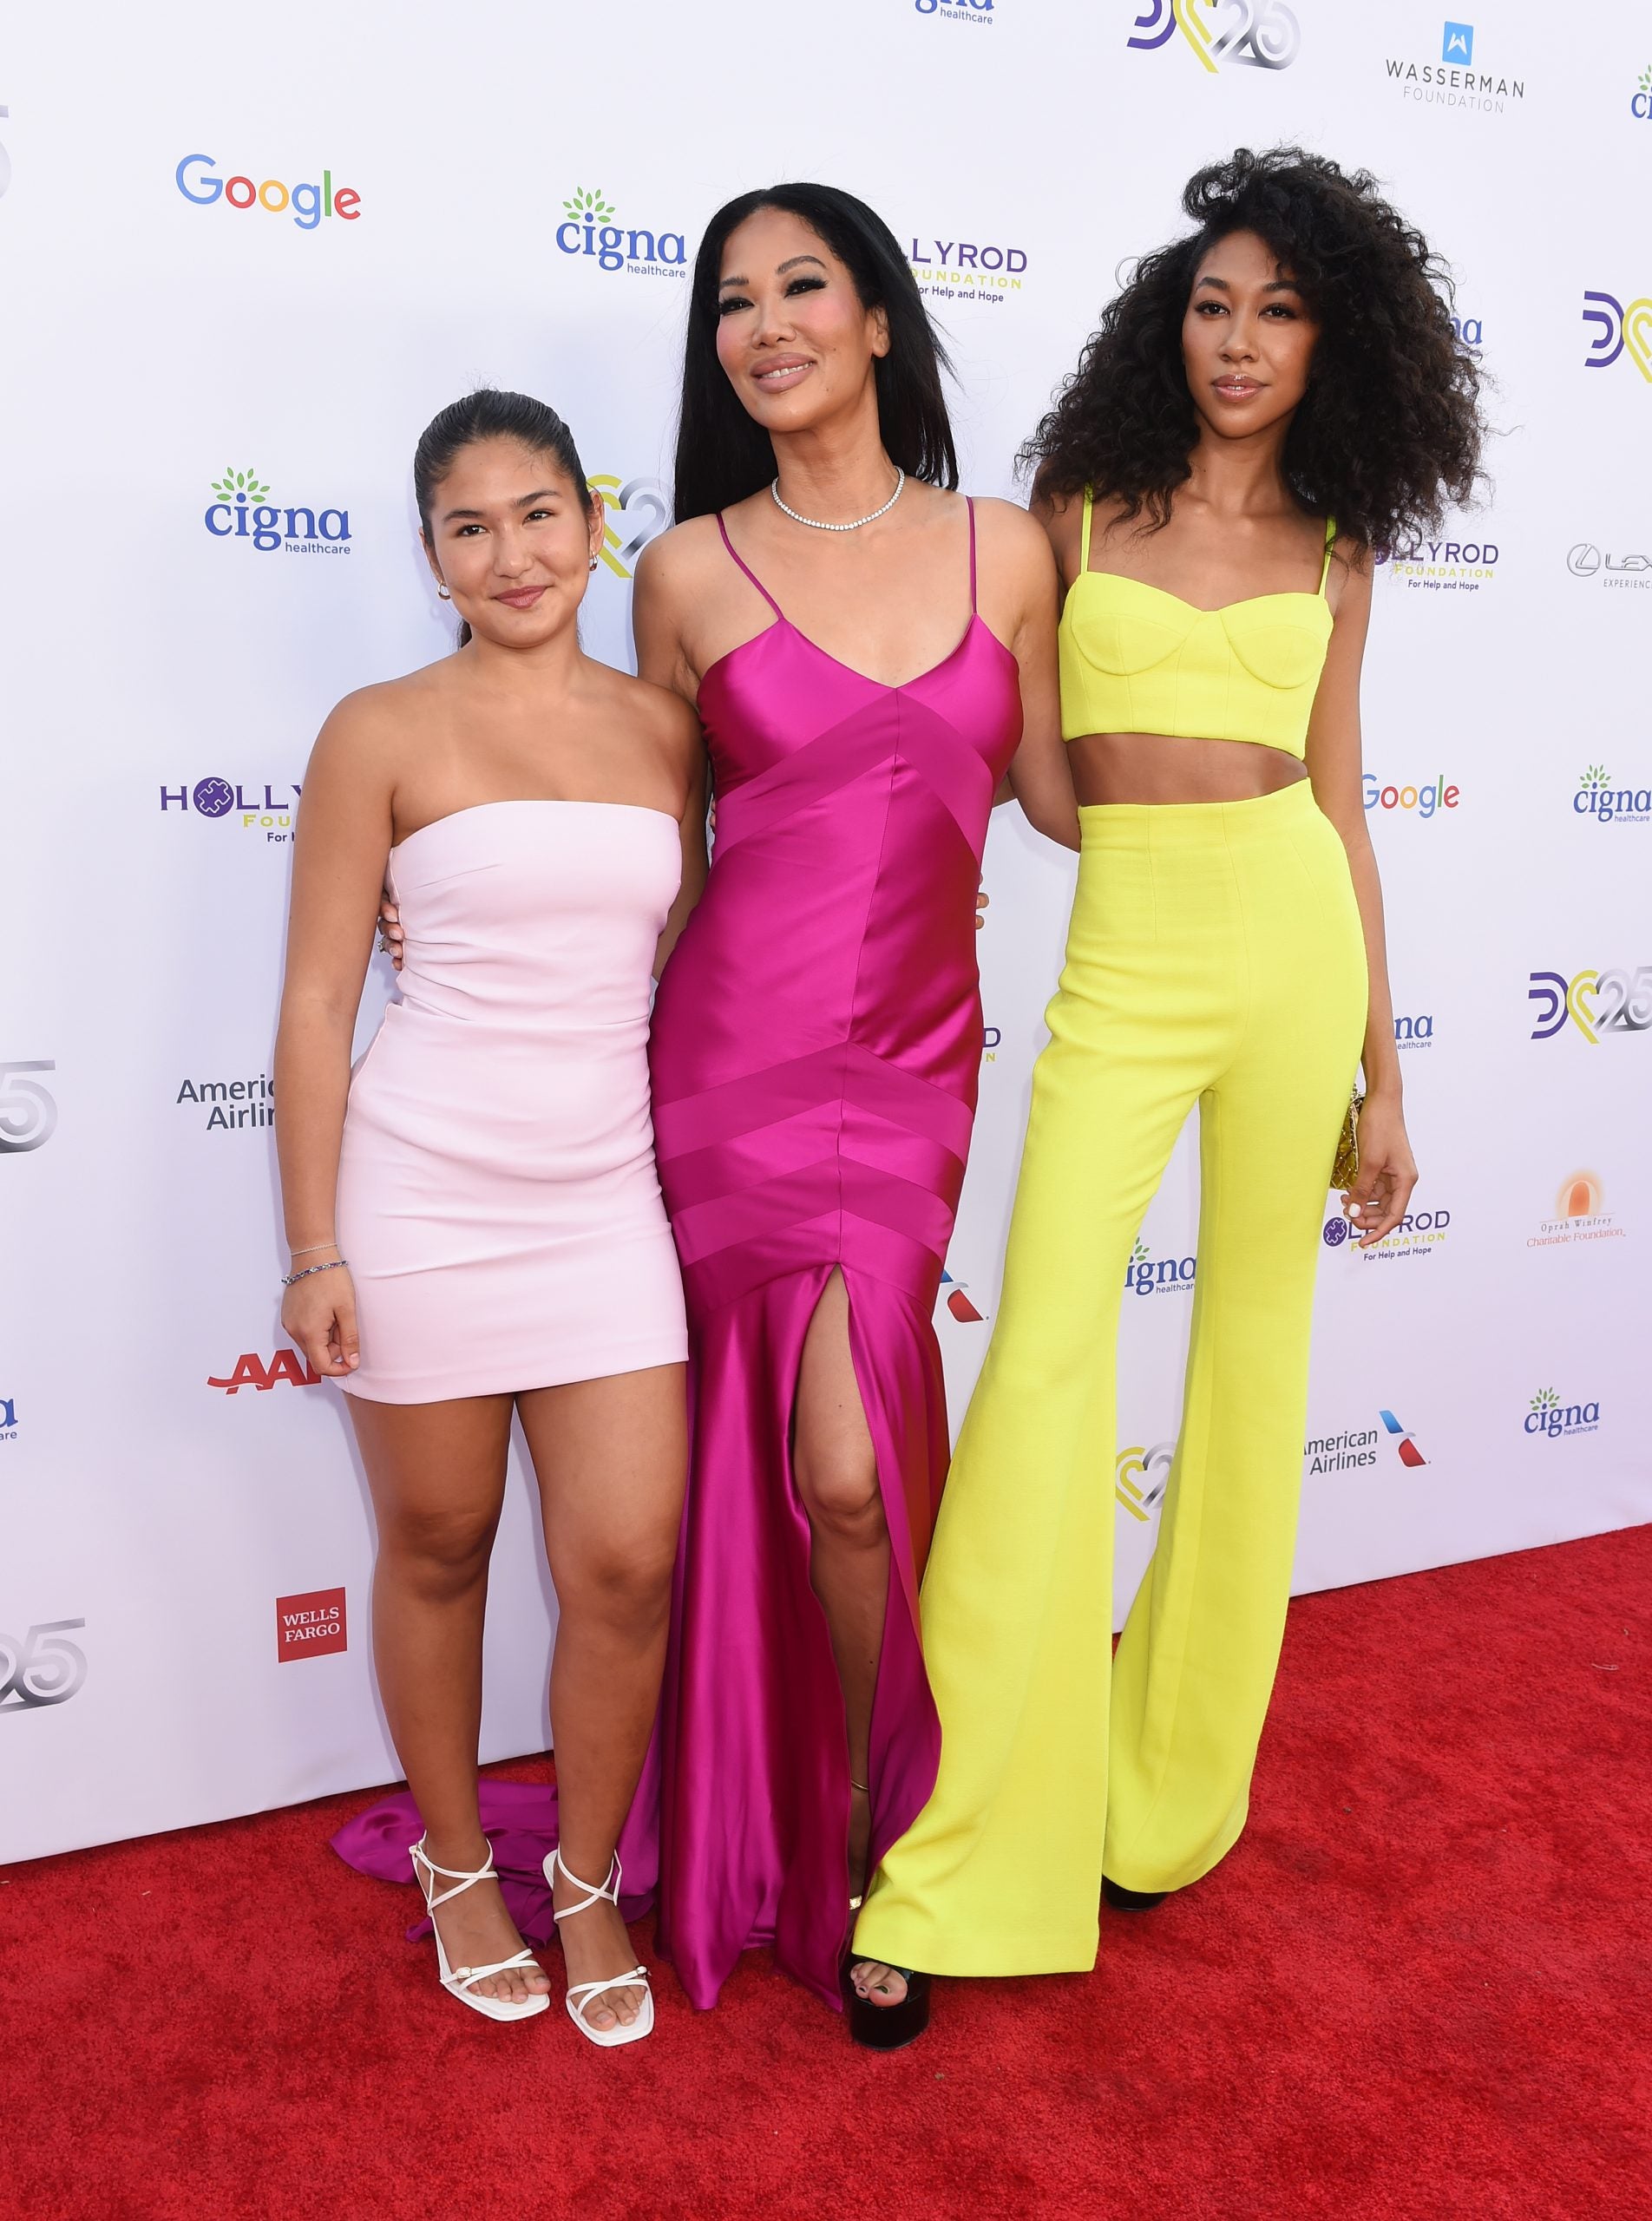 Celebrity Families Hit The Red Carpet For The HollyRod Foundation’s 25th Anniversary Celebration